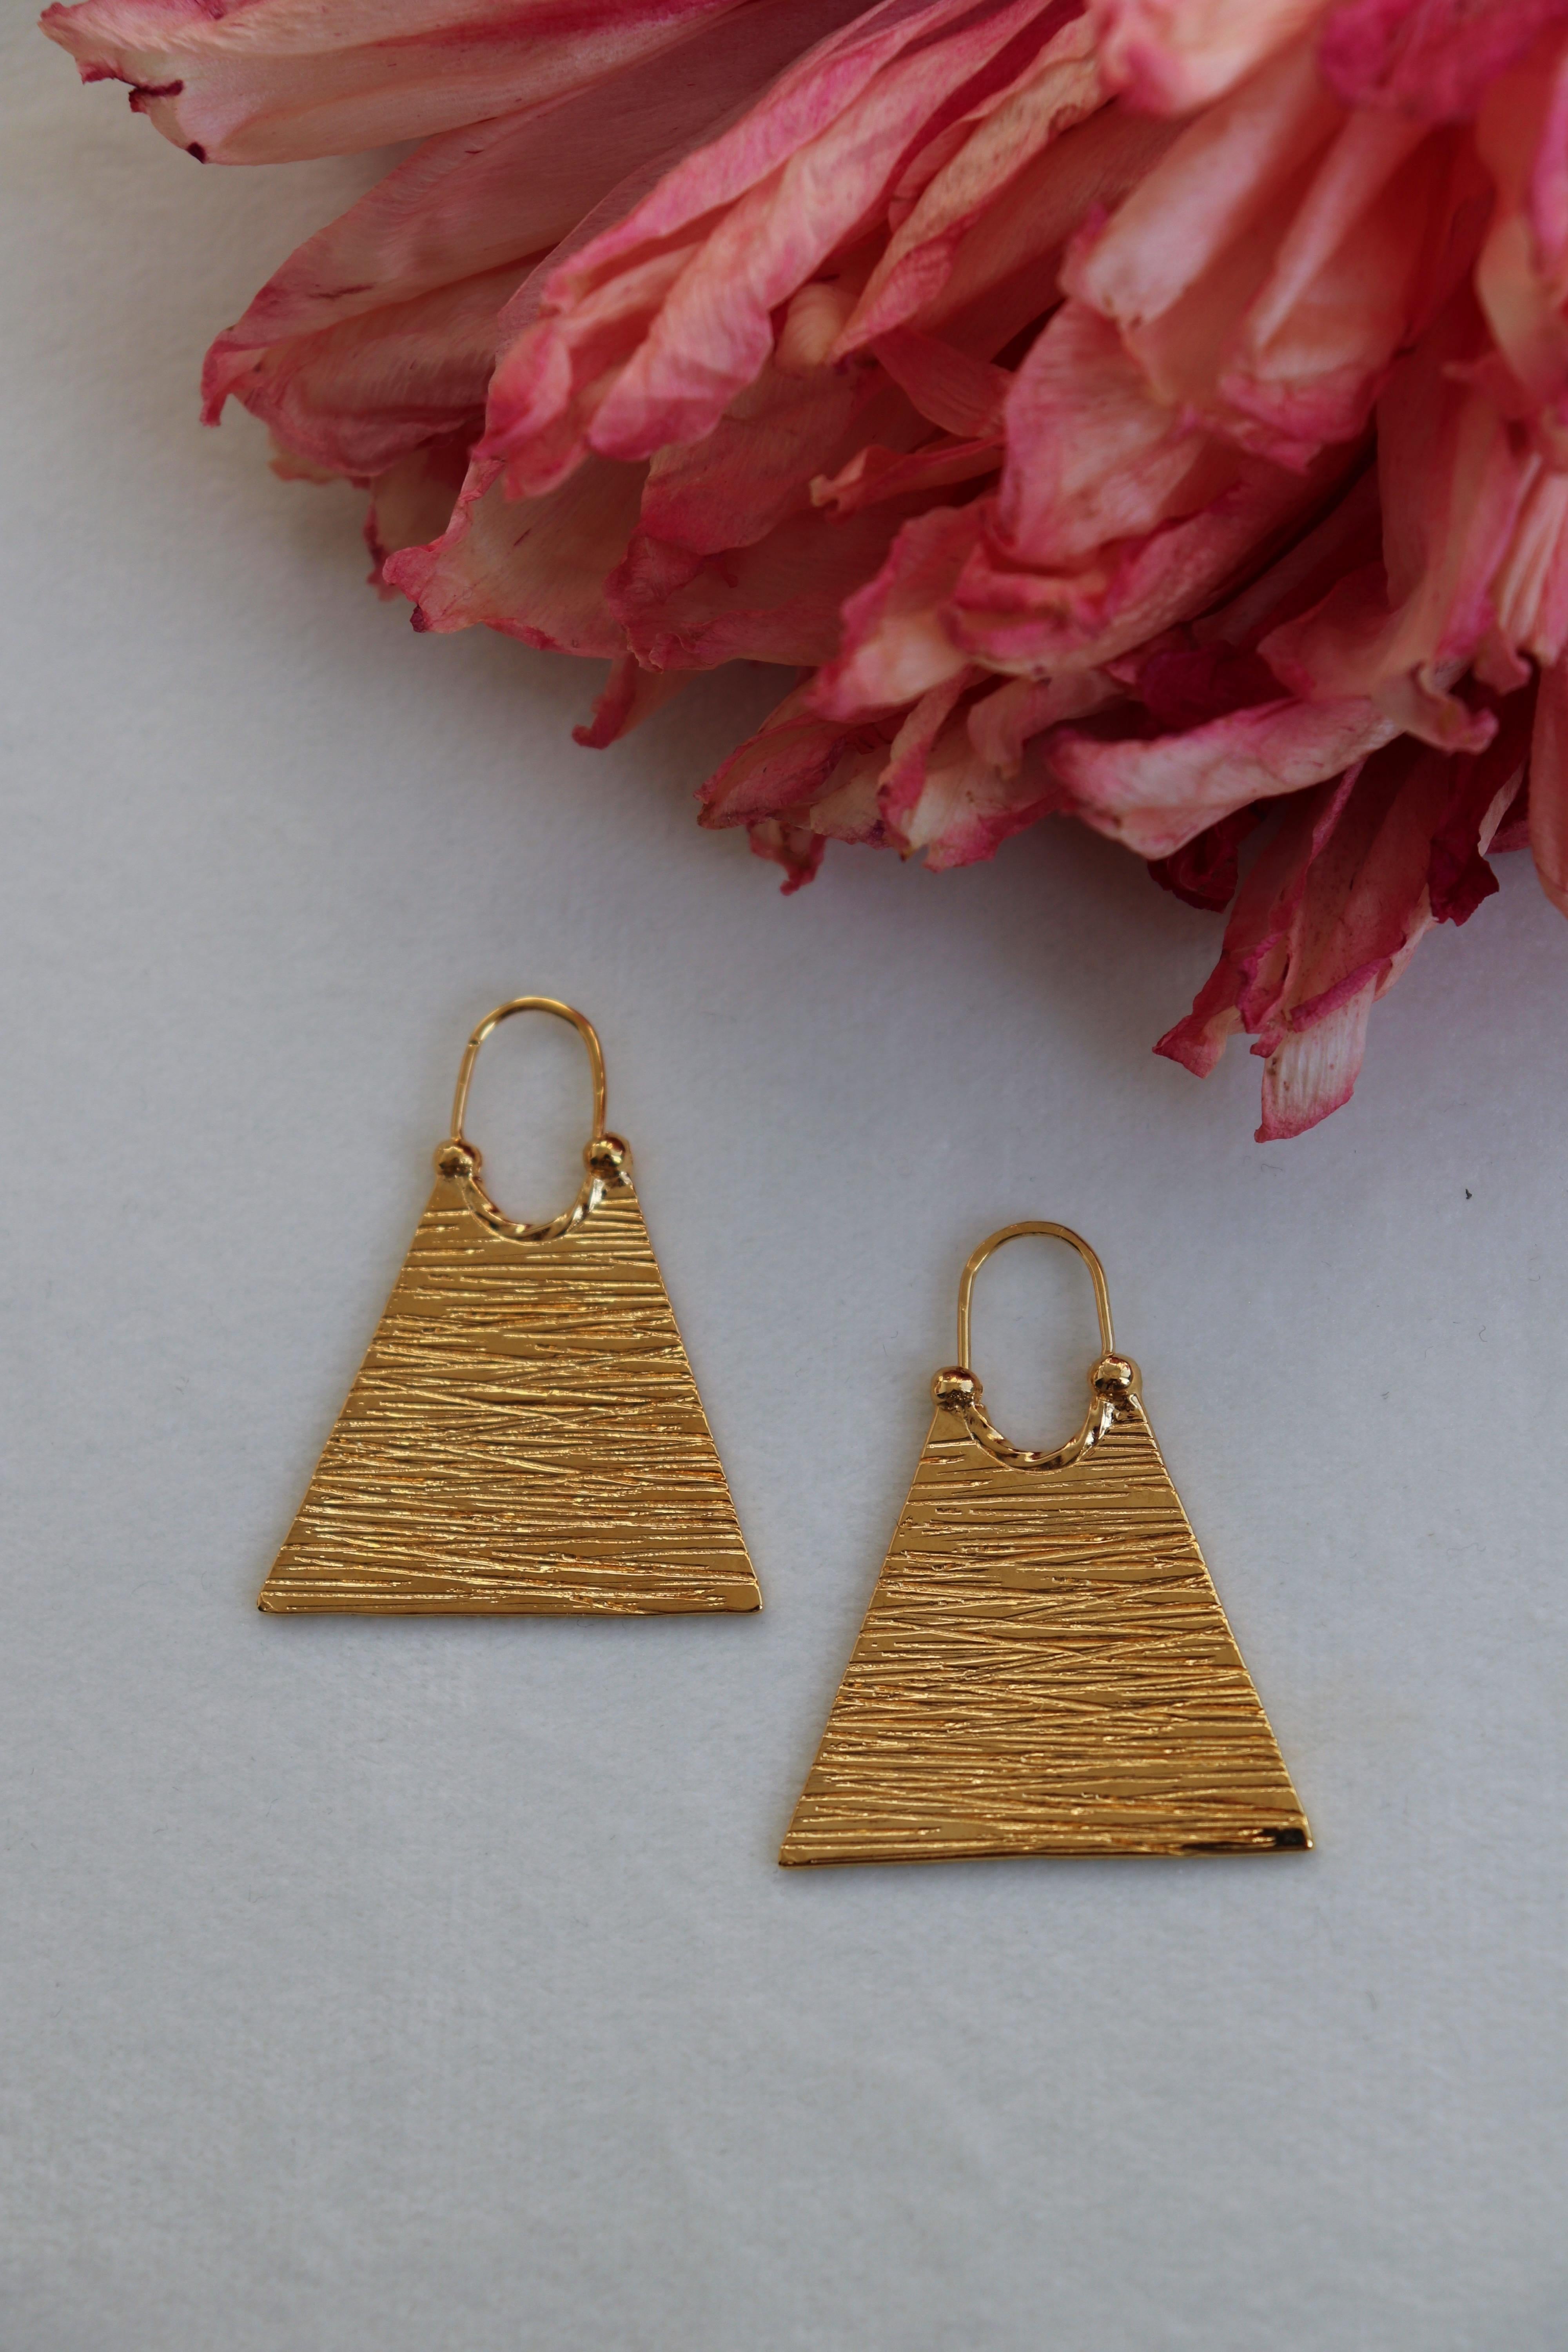 Mapuche Earrings are handmade of 24ct gold-plated bronze and the ear pin made of silver to avoid any possible allergies. 

The Mapuche people - ‘People of the Earth’- are the largest indigenous inhabitants of Chile and Argentina. Starting